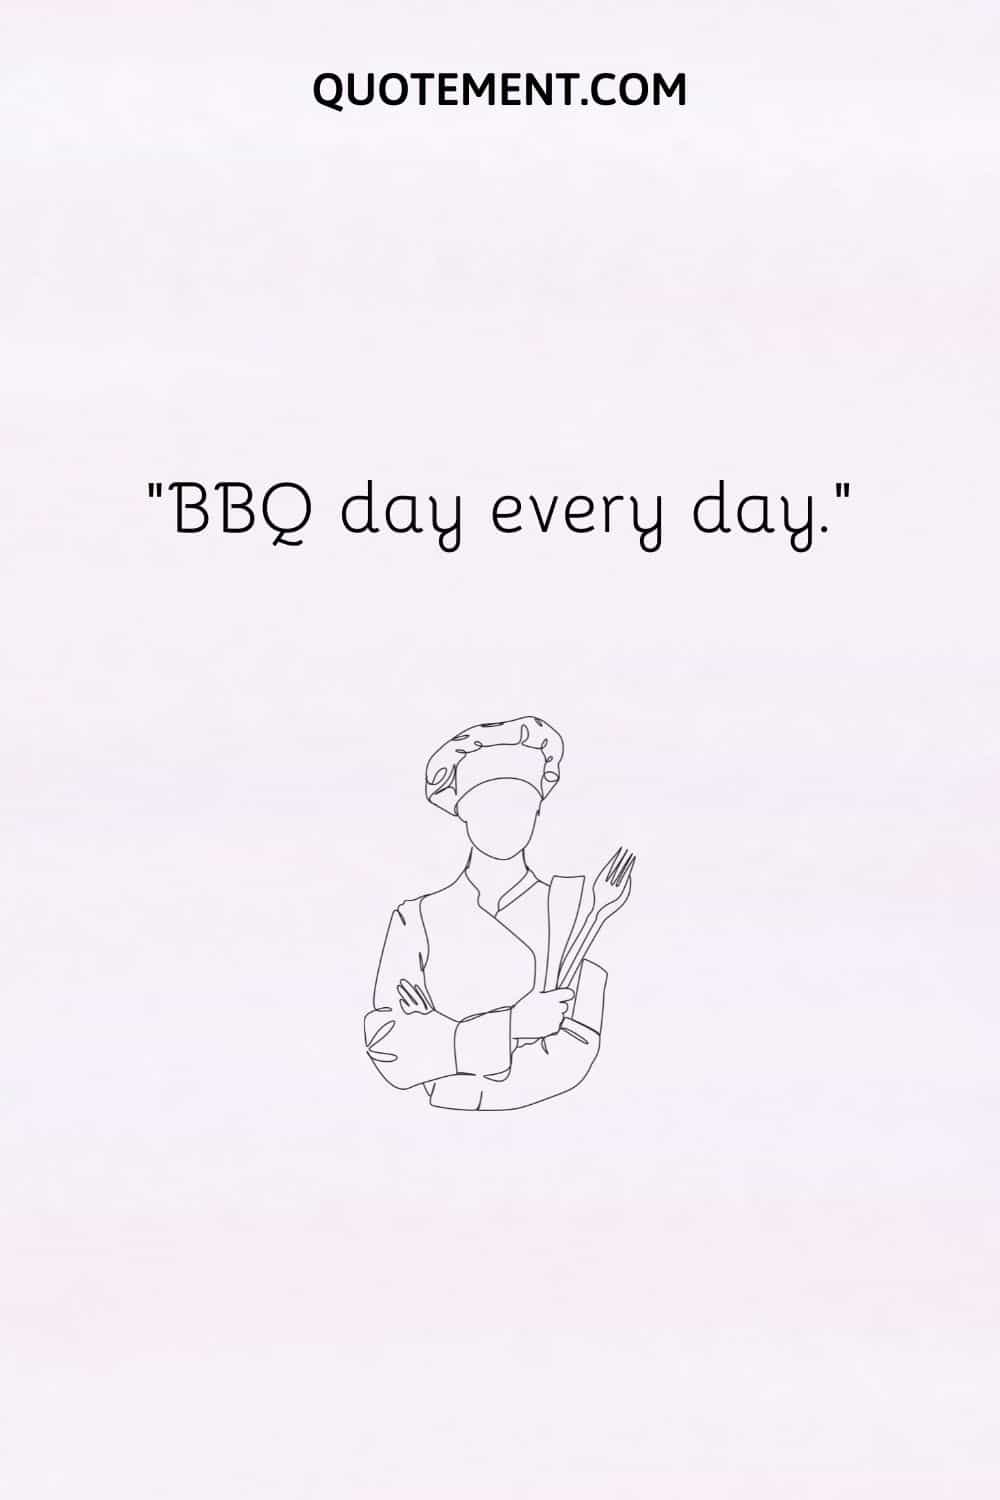 BBQ day every day